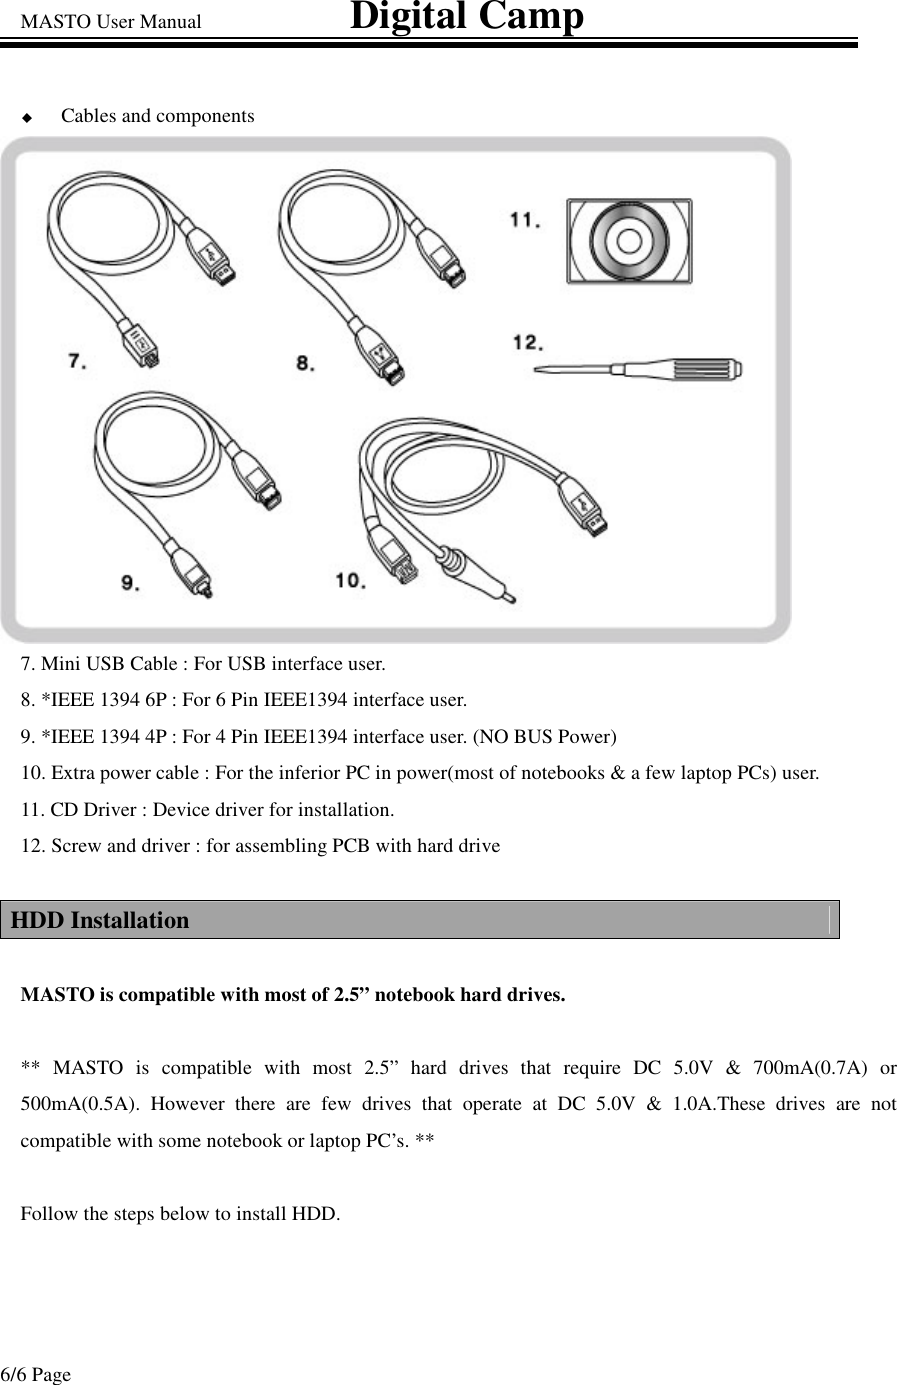 MASTO User Manual                             Digital Camp 6/6 Page Cables and components 7. Mini USB Cable : For USB interface user. 8. *IEEE 1394 6P : For 6 Pin IEEE1394 interface user. 9. *IEEE 1394 4P : For 4 Pin IEEE1394 interface user. (NO BUS Power) 10. Extra power cable : For the inferior PC in power(most of notebooks &amp; a few laptop PCs) user. 11. CD Driver : Device driver for installation. 12. Screw and driver : for assembling PCB with hard drive  HDD Installation  MASTO is compatible with most of 2.5” notebook hard drives.  **  MASTO is compatible with most 2.5” hard drives that require DC 5.0V &amp; 700mA(0.7A) or 500mA(0.5A). However there are few drives that operate at DC 5.0V &amp; 1.0A.These drives are not compatible with some notebook or laptop PC’s. **  Follow the steps below to install HDD.   